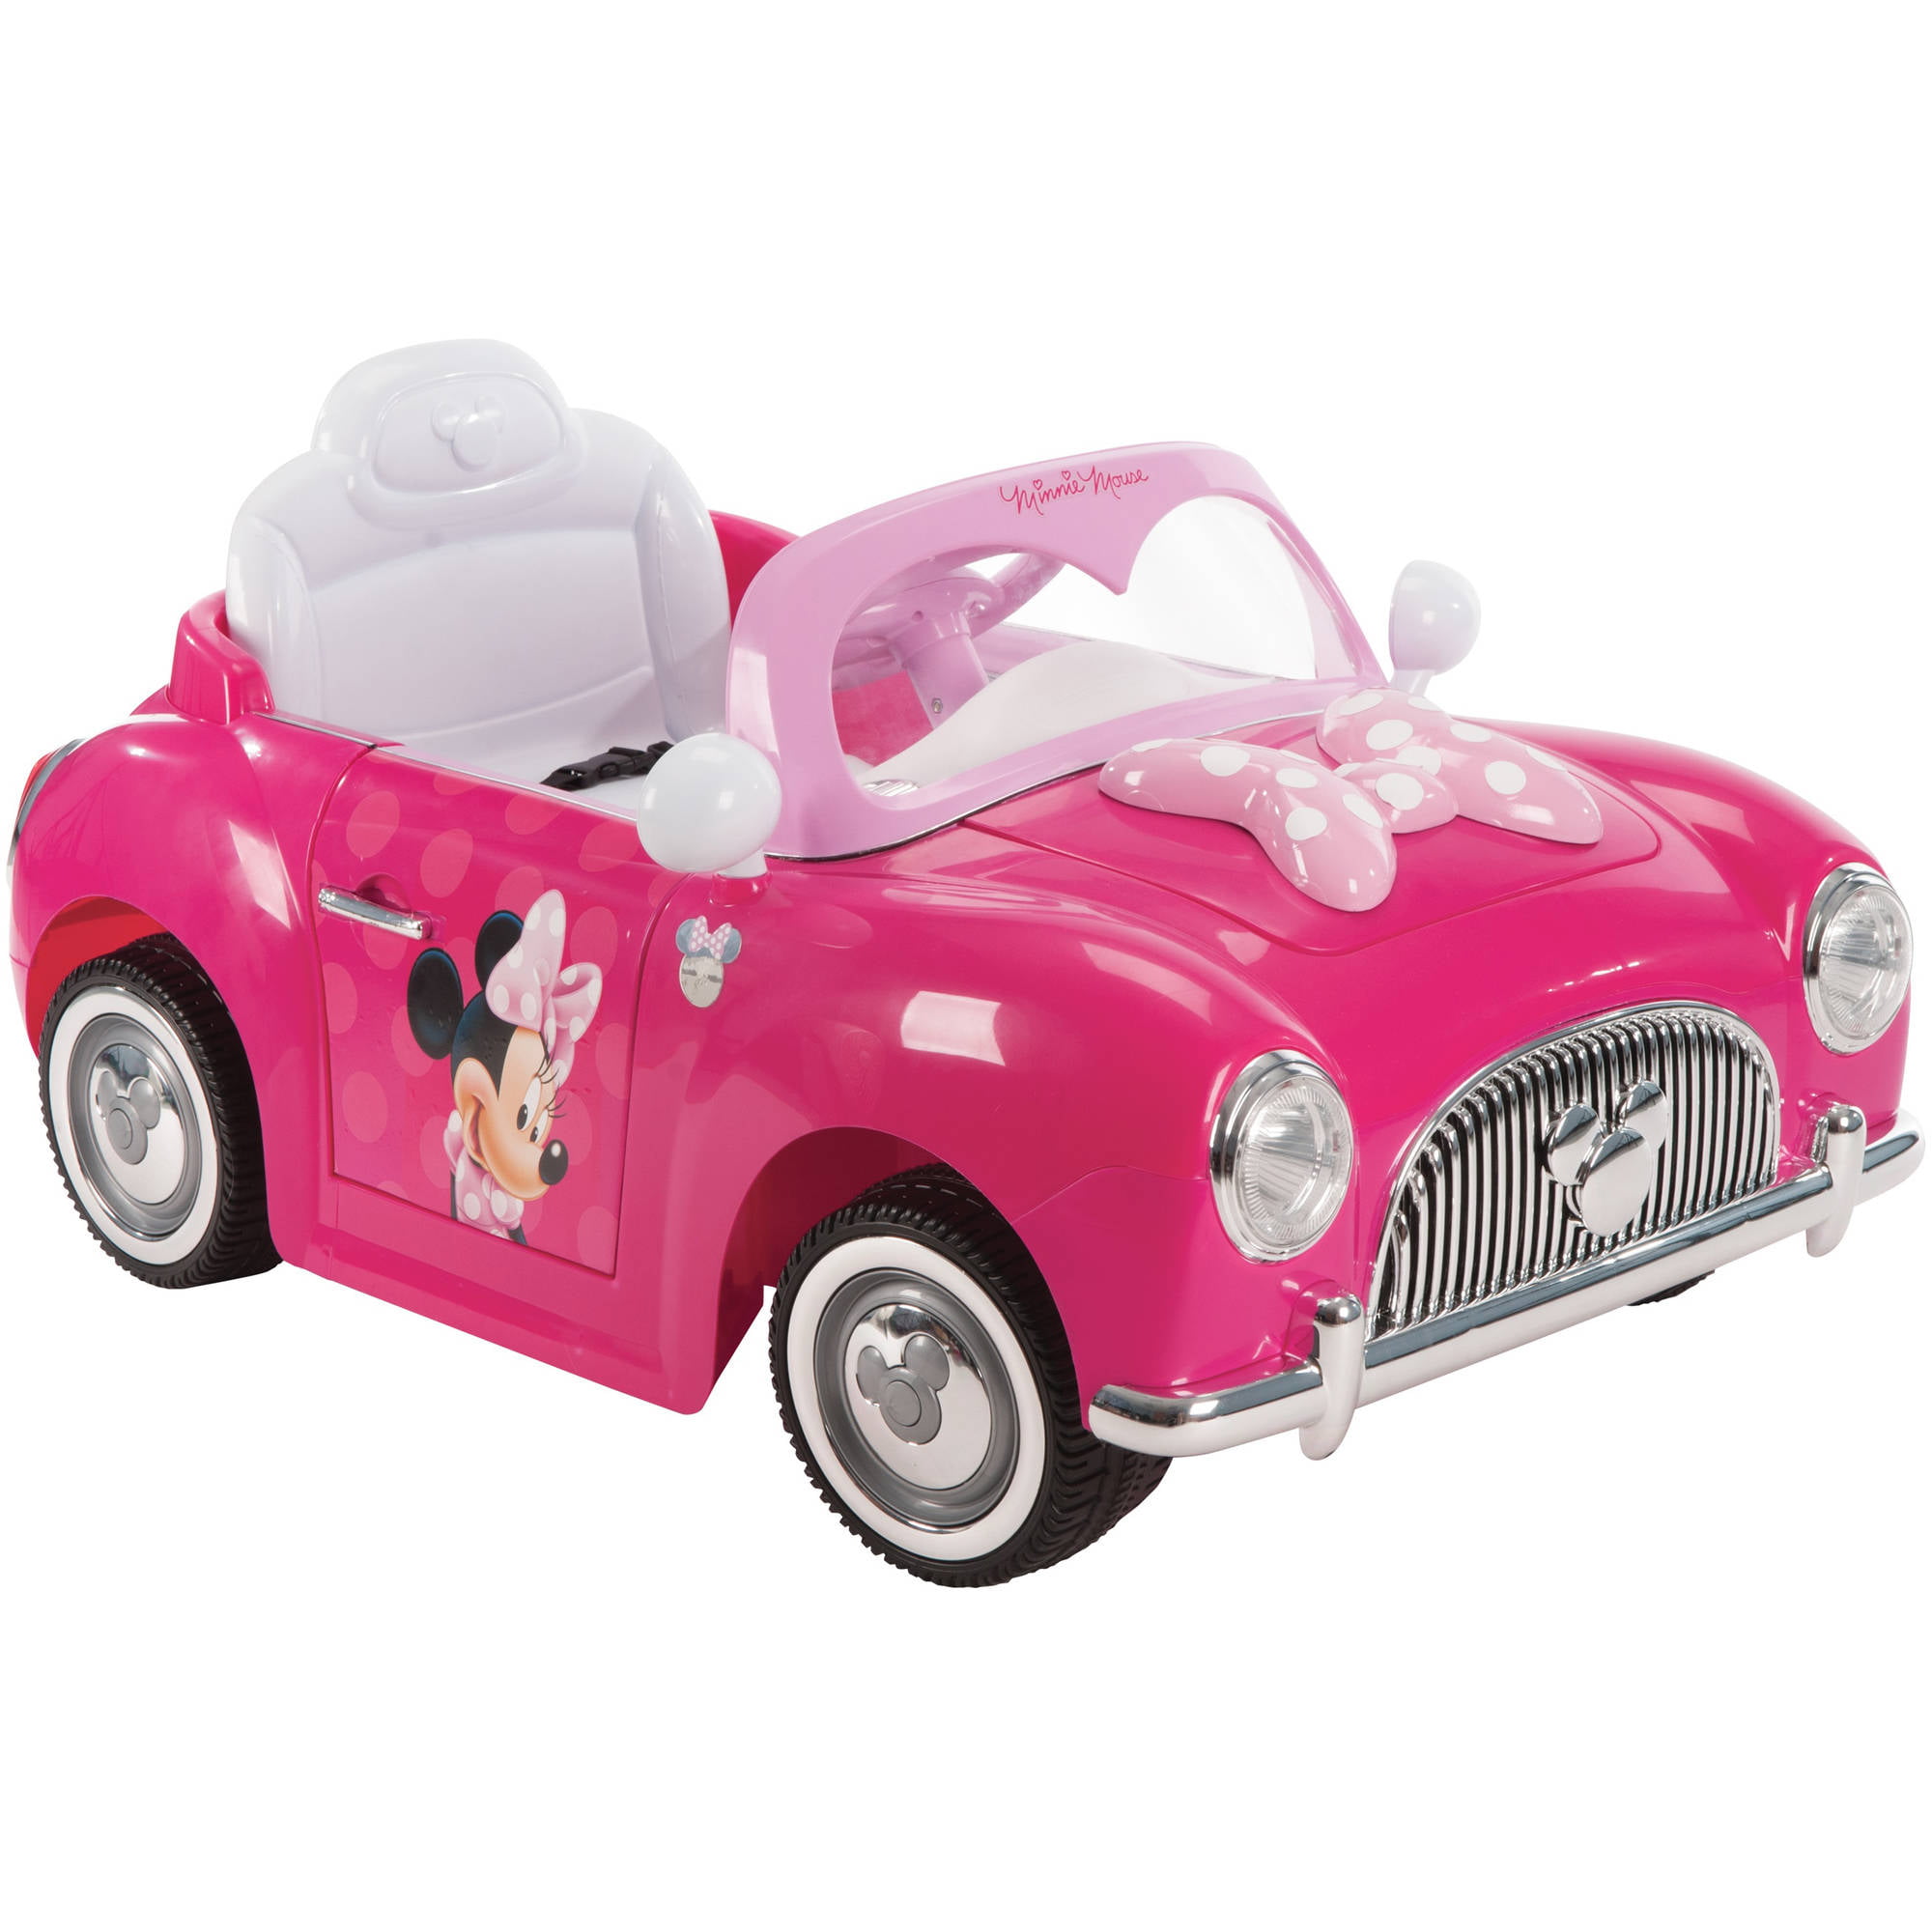 Minnie Mouse Remote Control Convertible Car Toy Pink Disney Fairy Tale Kids  Gift